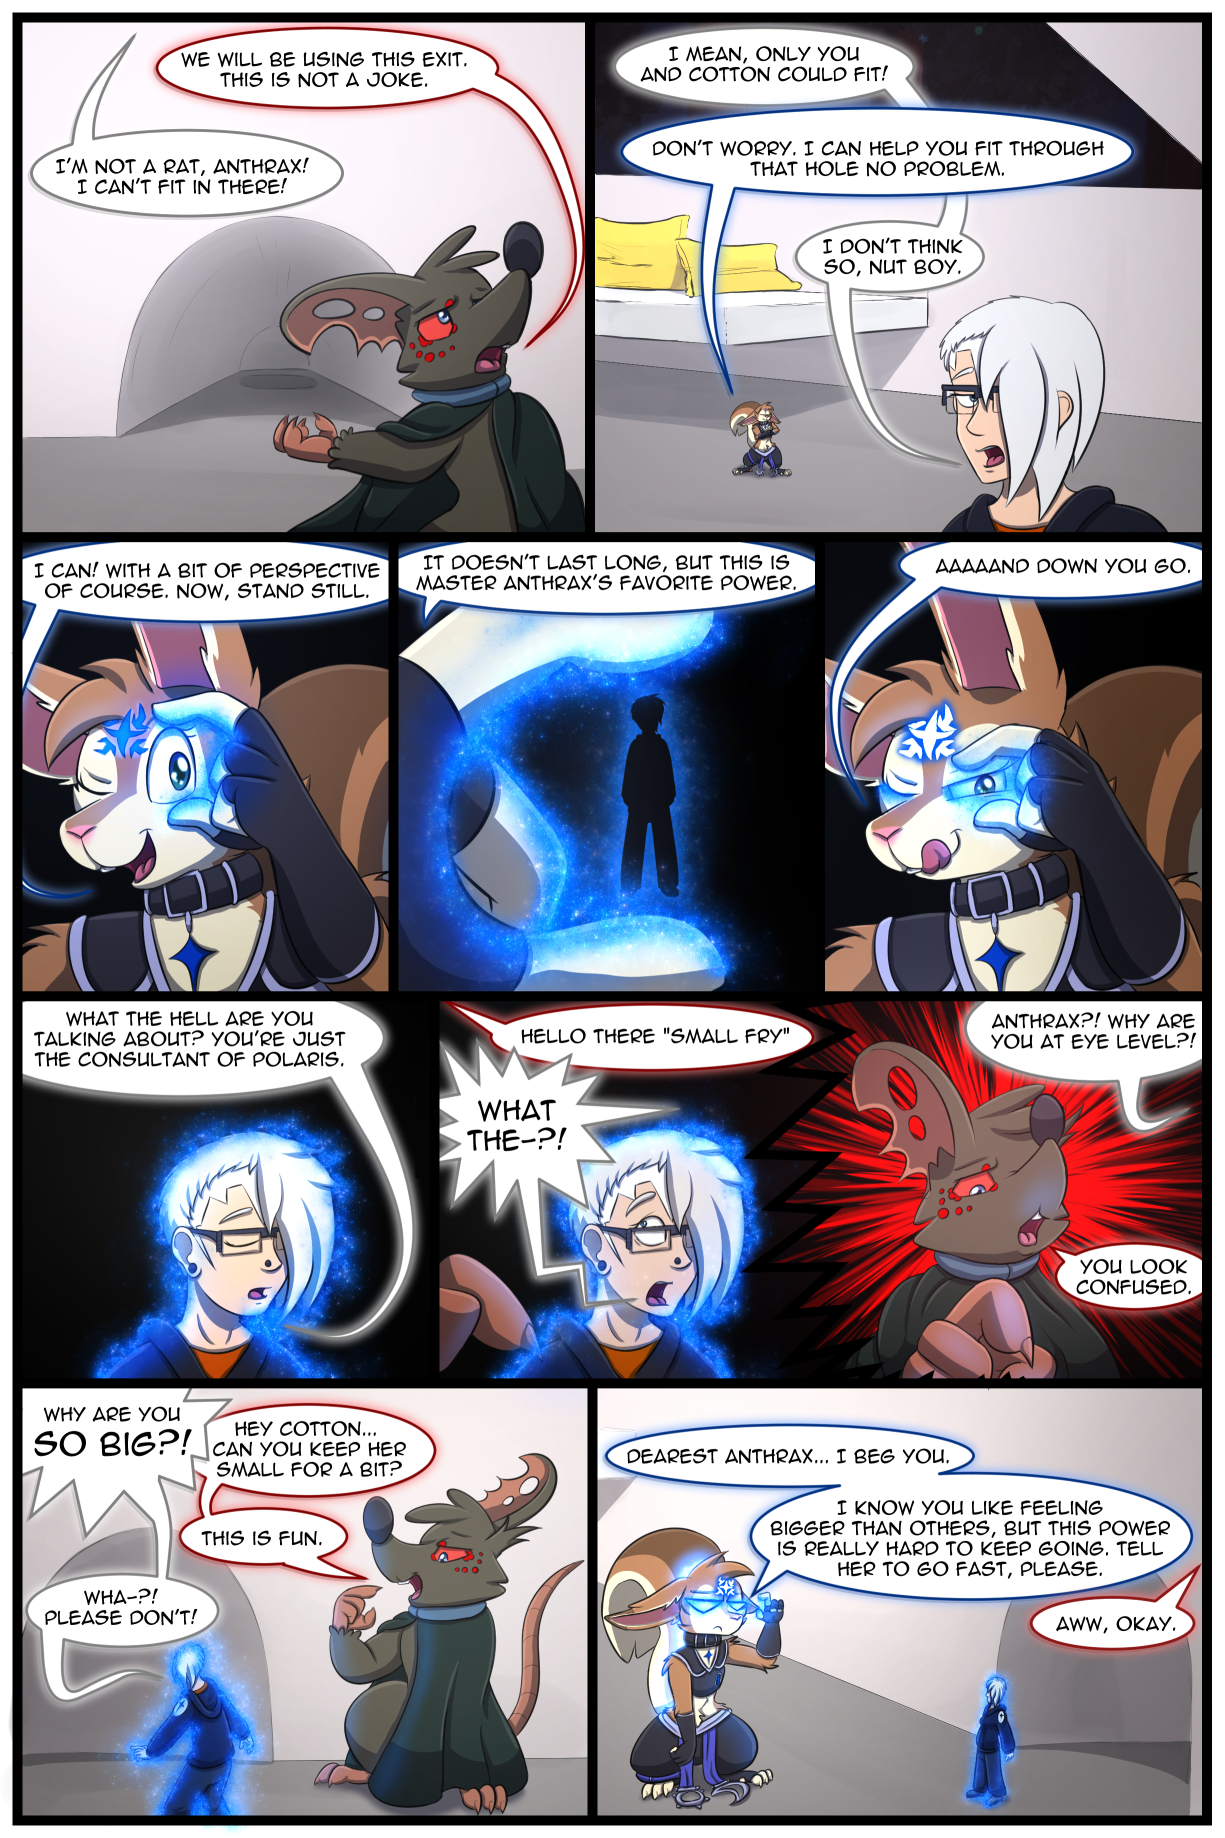 Ch5 Page 2 – Sizing